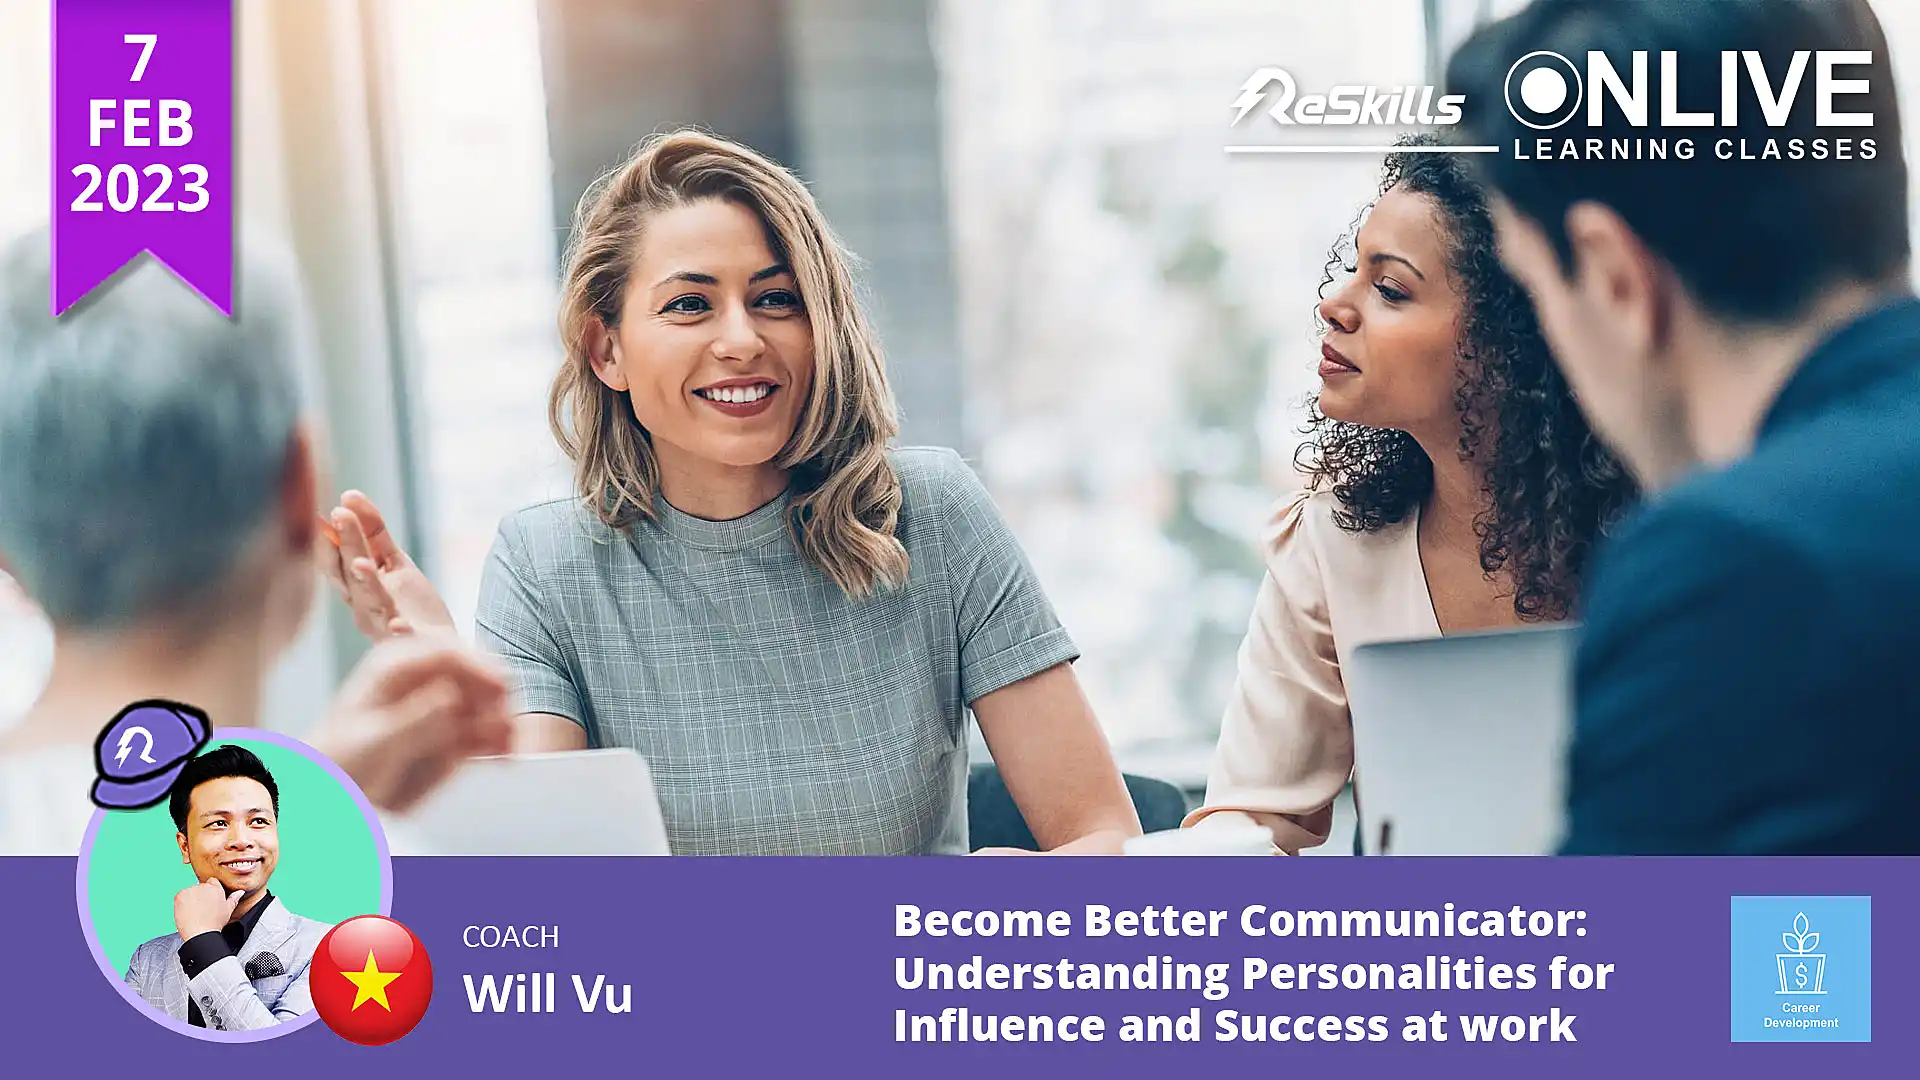 Become Better Communicator: Understanding Personalities for Influence and Success at Work - ReSkills